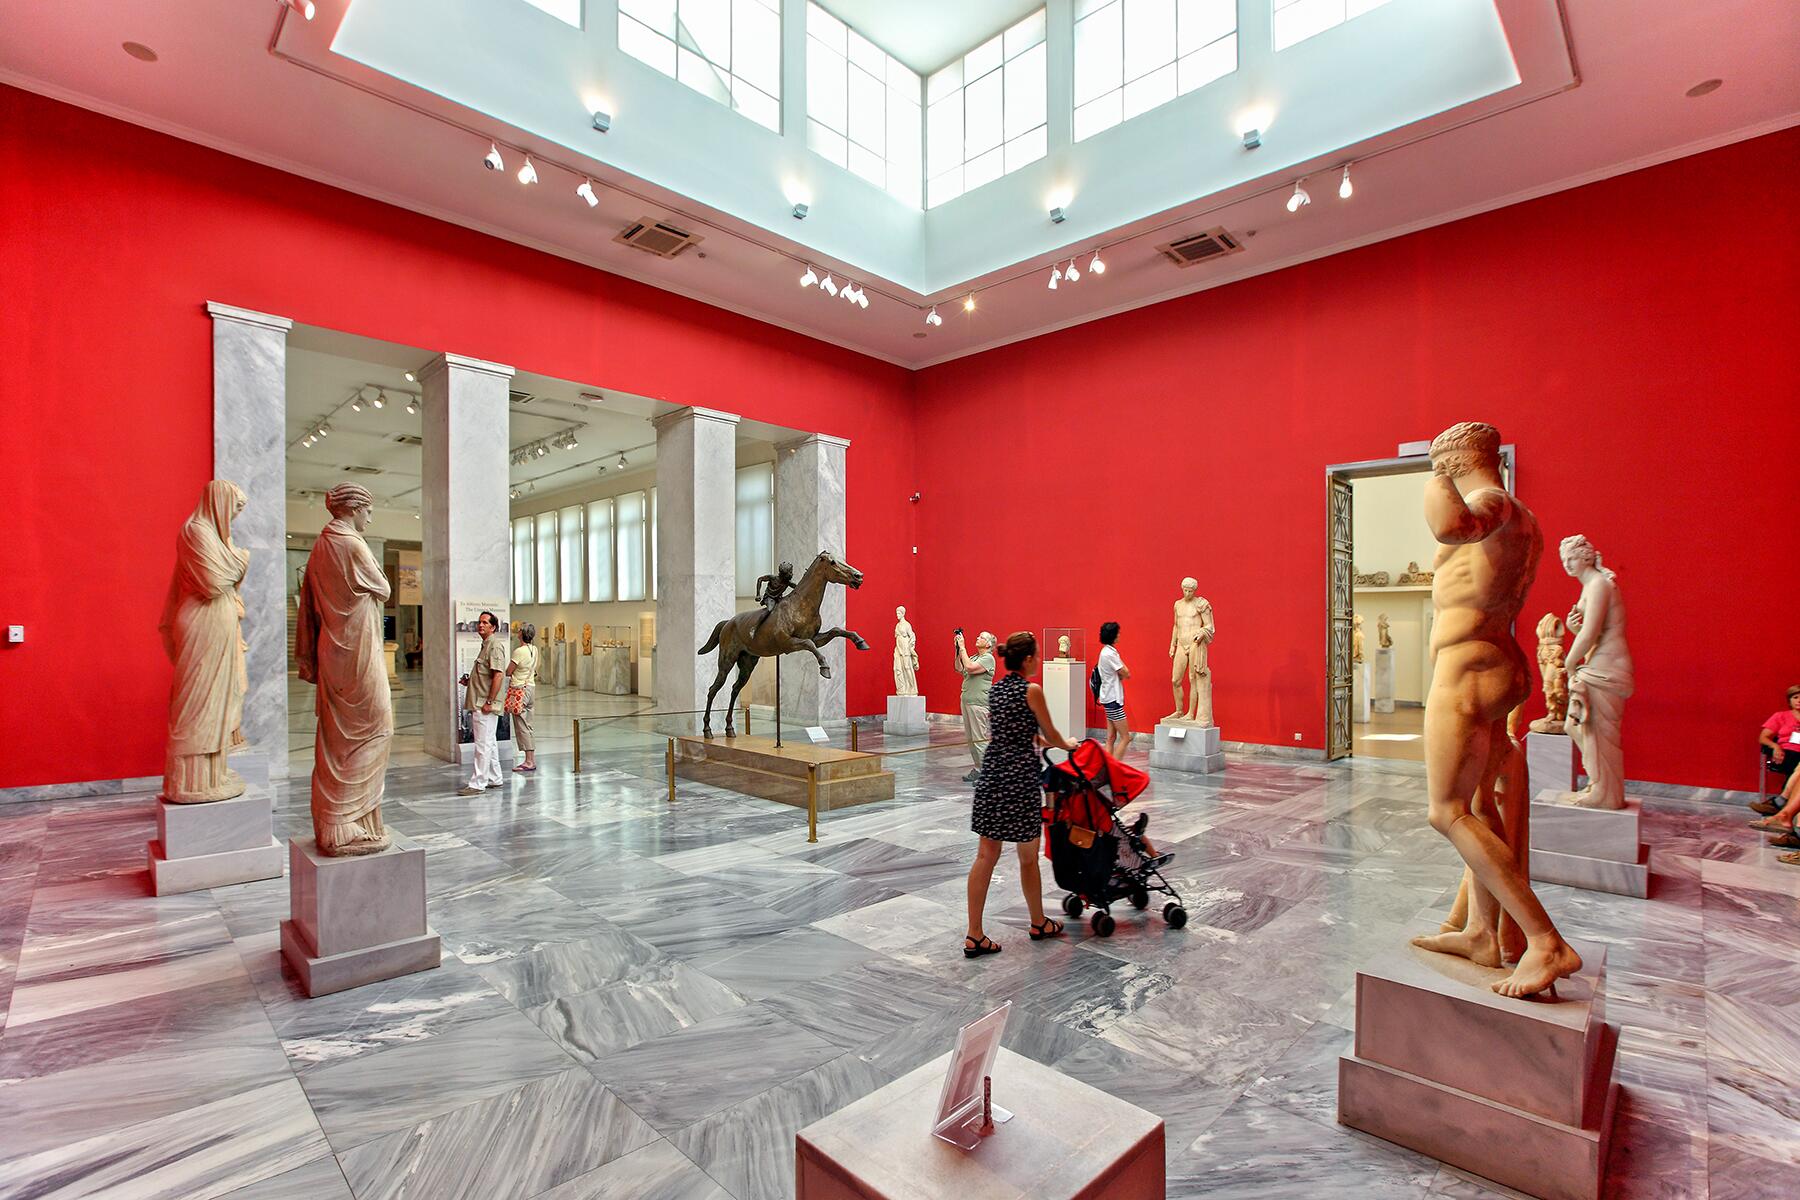 <a href='https://www.fodors.com/world/europe/greece/experiences/news/photos/22-ultimate-things-to-do-in-greece#'>From &quot;29 Ultimate Things to Do in Greece: Museum Hop in a Cultural Capital&quot;</a>